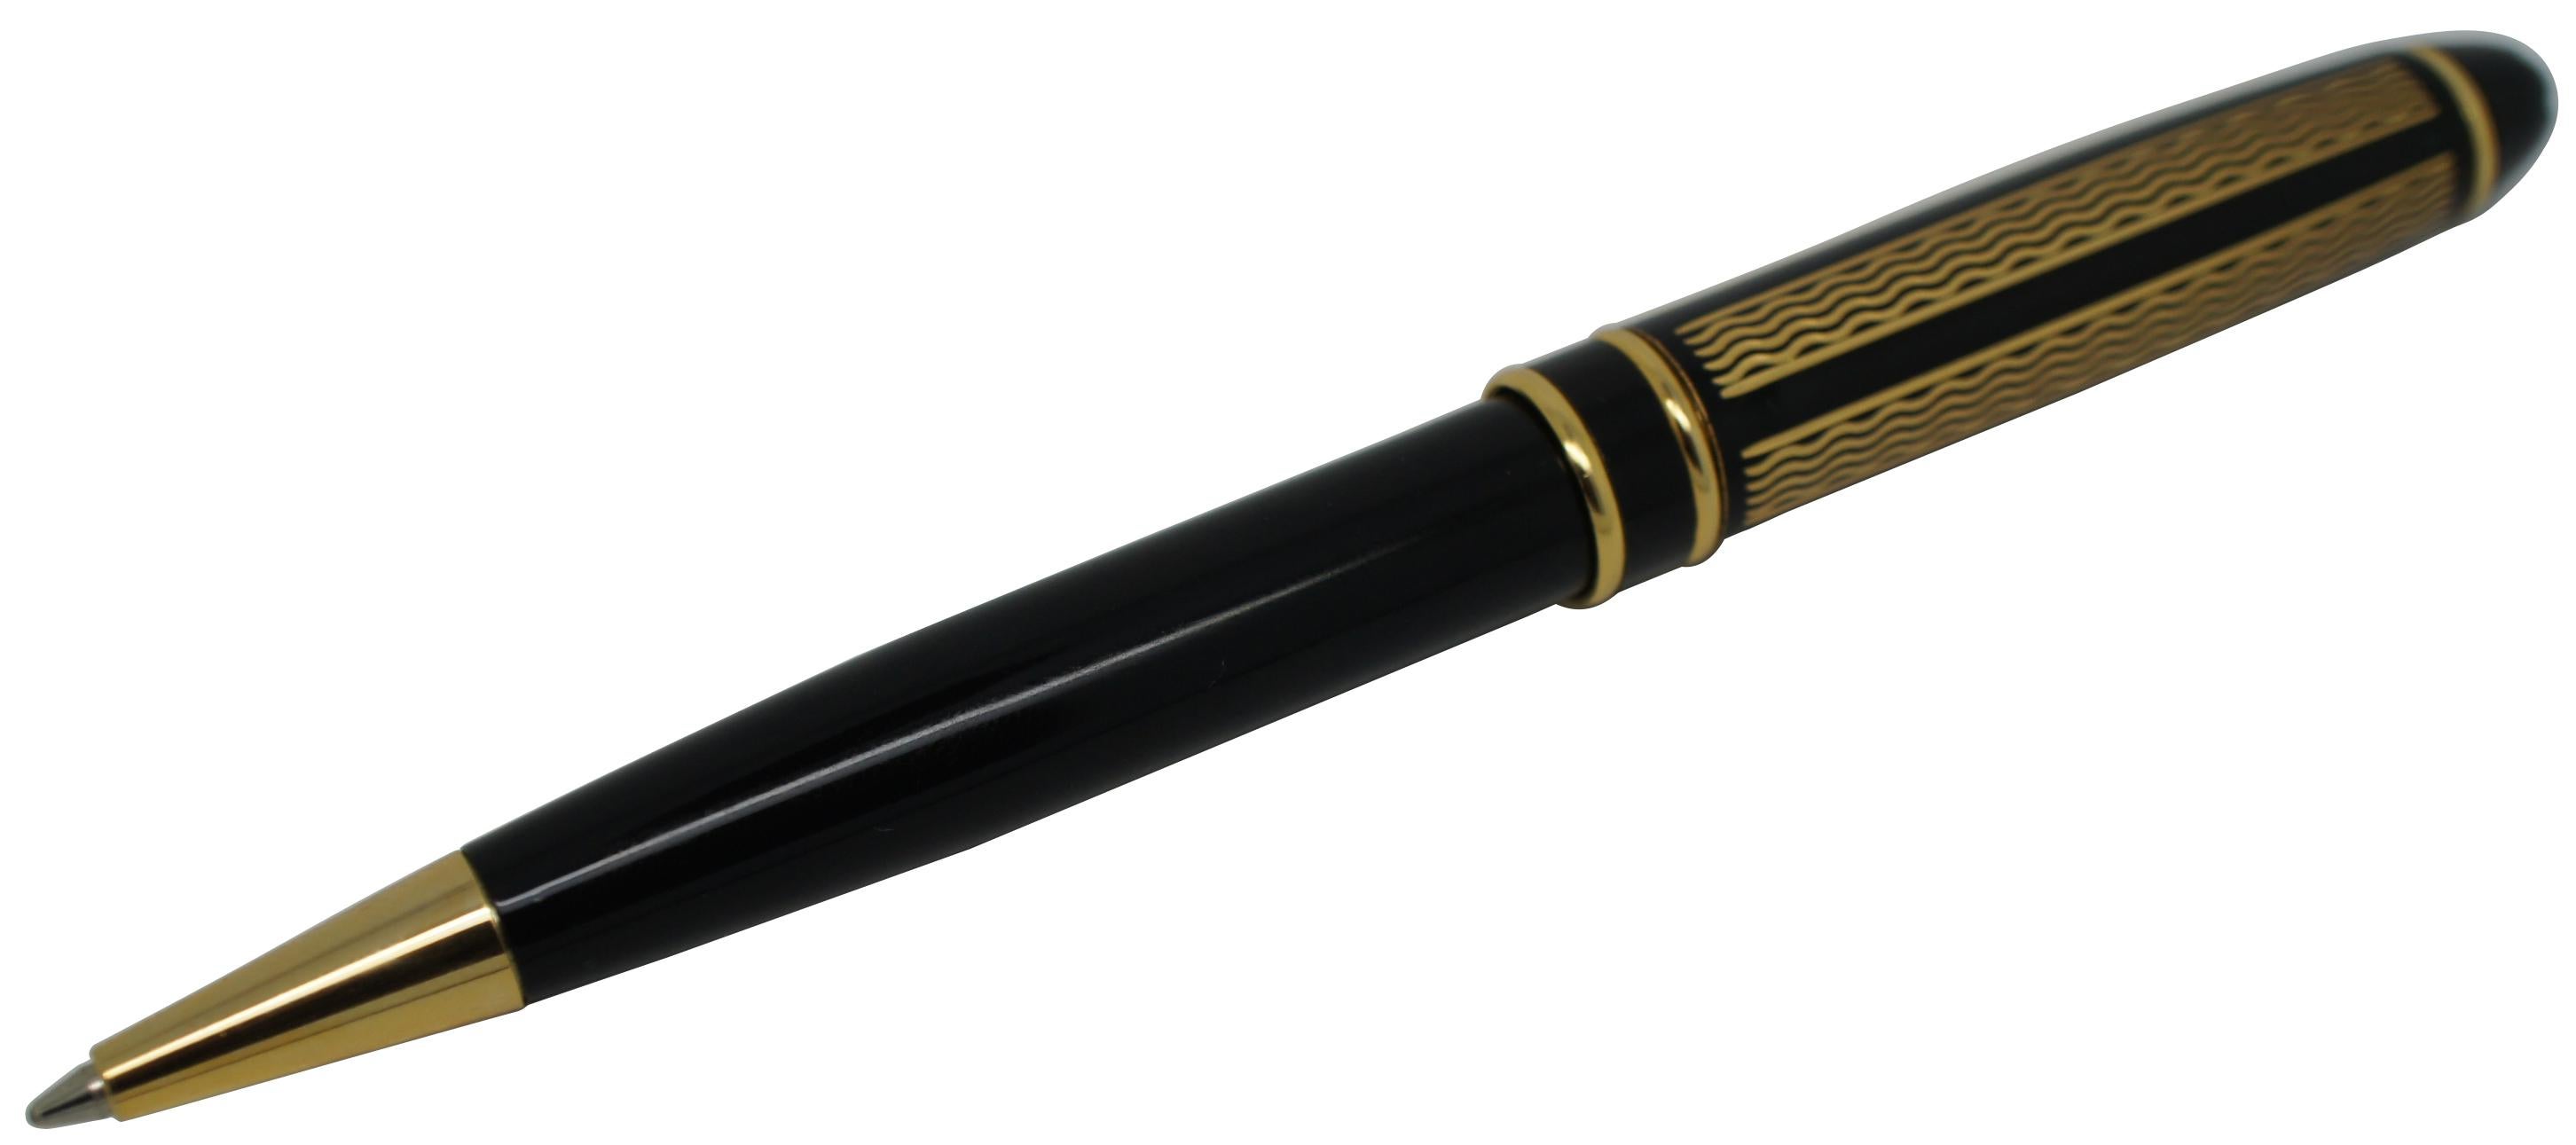 Vintage Montblanc Solitaire ballpoint pen in black with a gold wavy stripe pattern on the barrel.
   